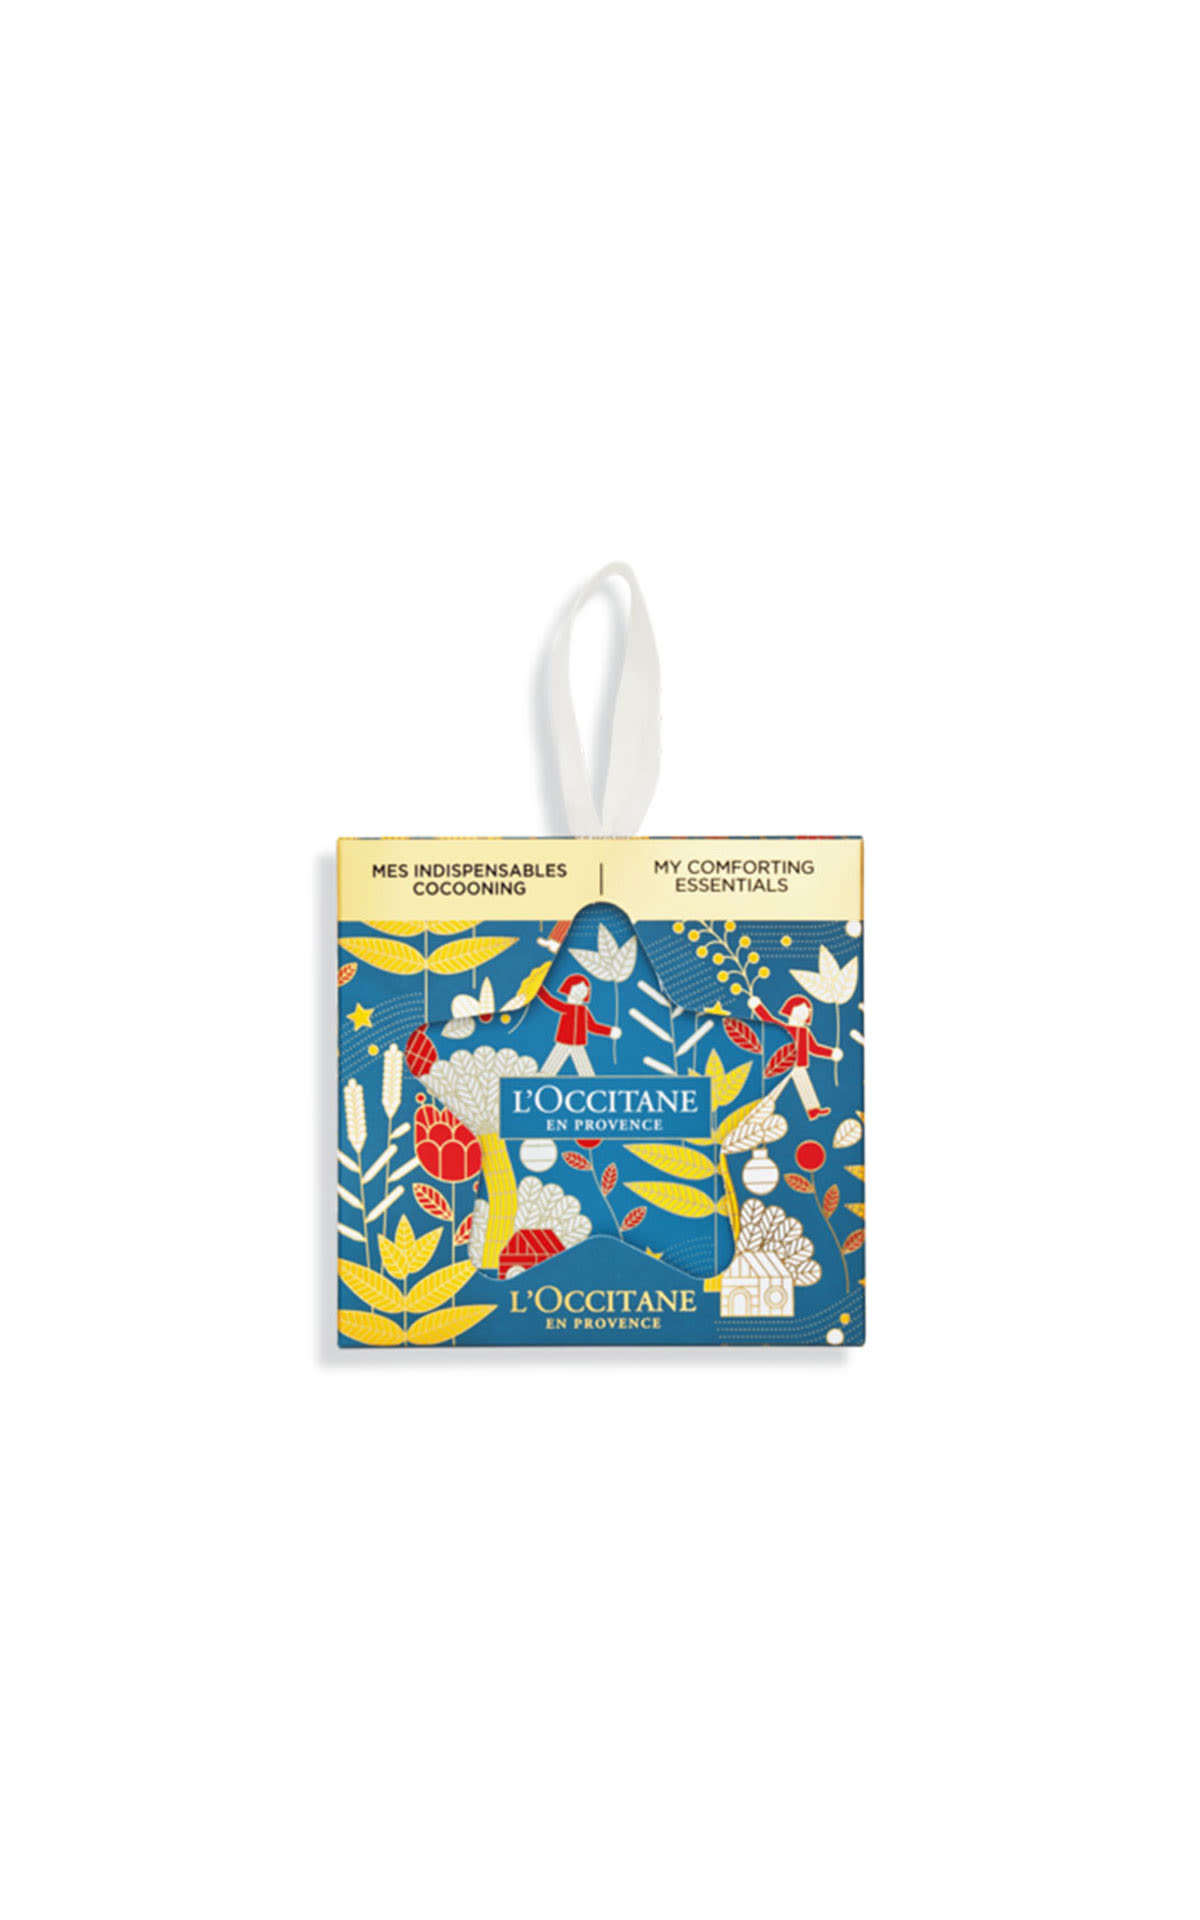 L'Occitane My conforting essencials from Bicester Village